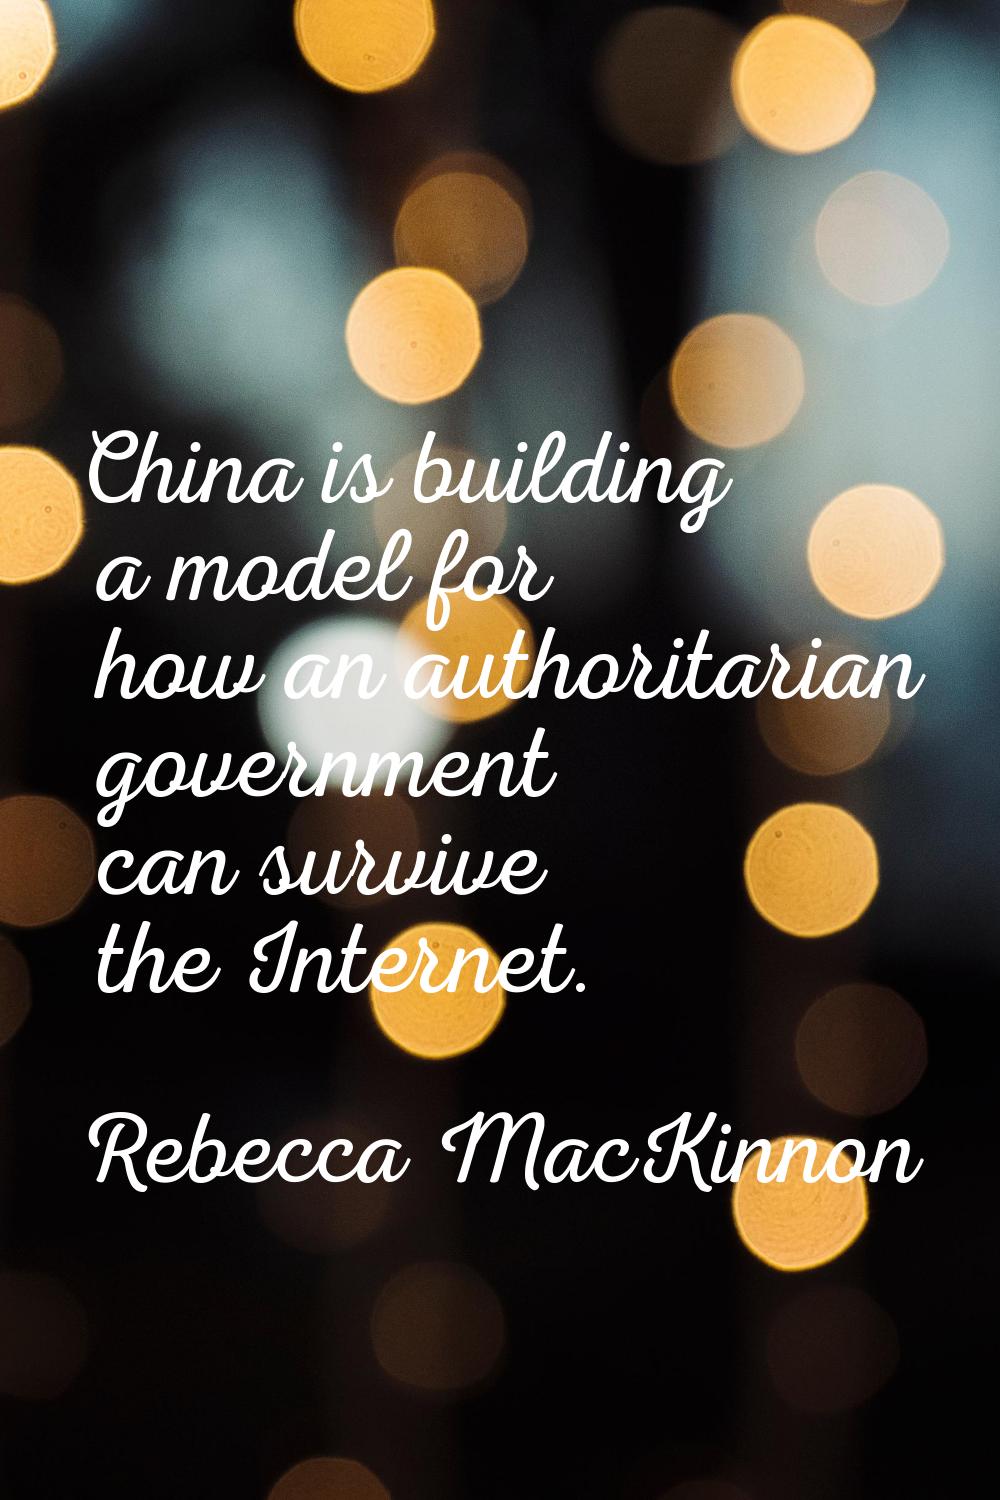 China is building a model for how an authoritarian government can survive the Internet.